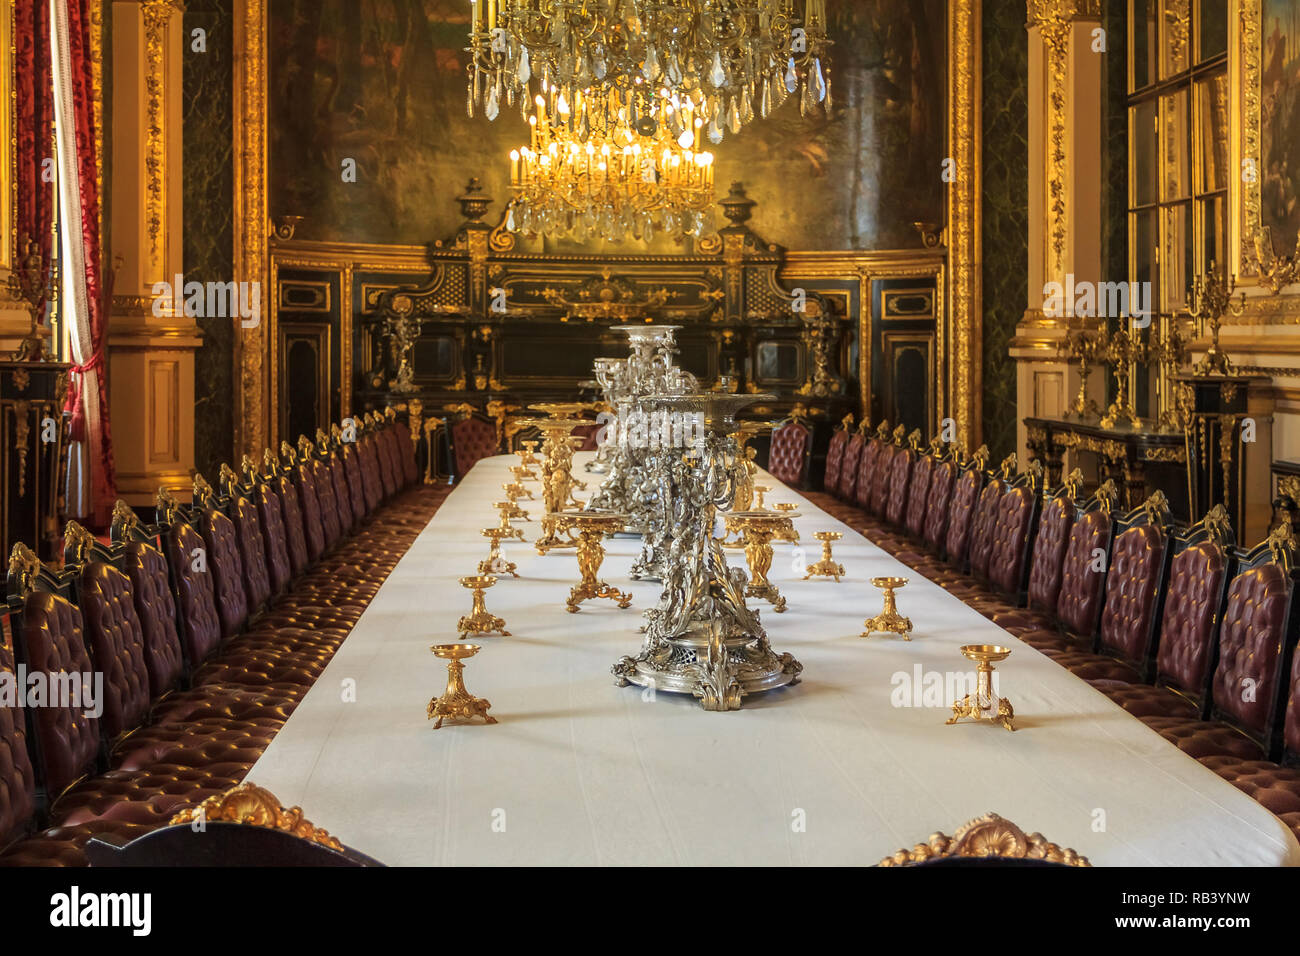 Paris, France - October 25, 2013: Banquet table in the apartments of Napoleon III in Louvre Museum with luxury baroque furnishings and stunning chande Stock Photo